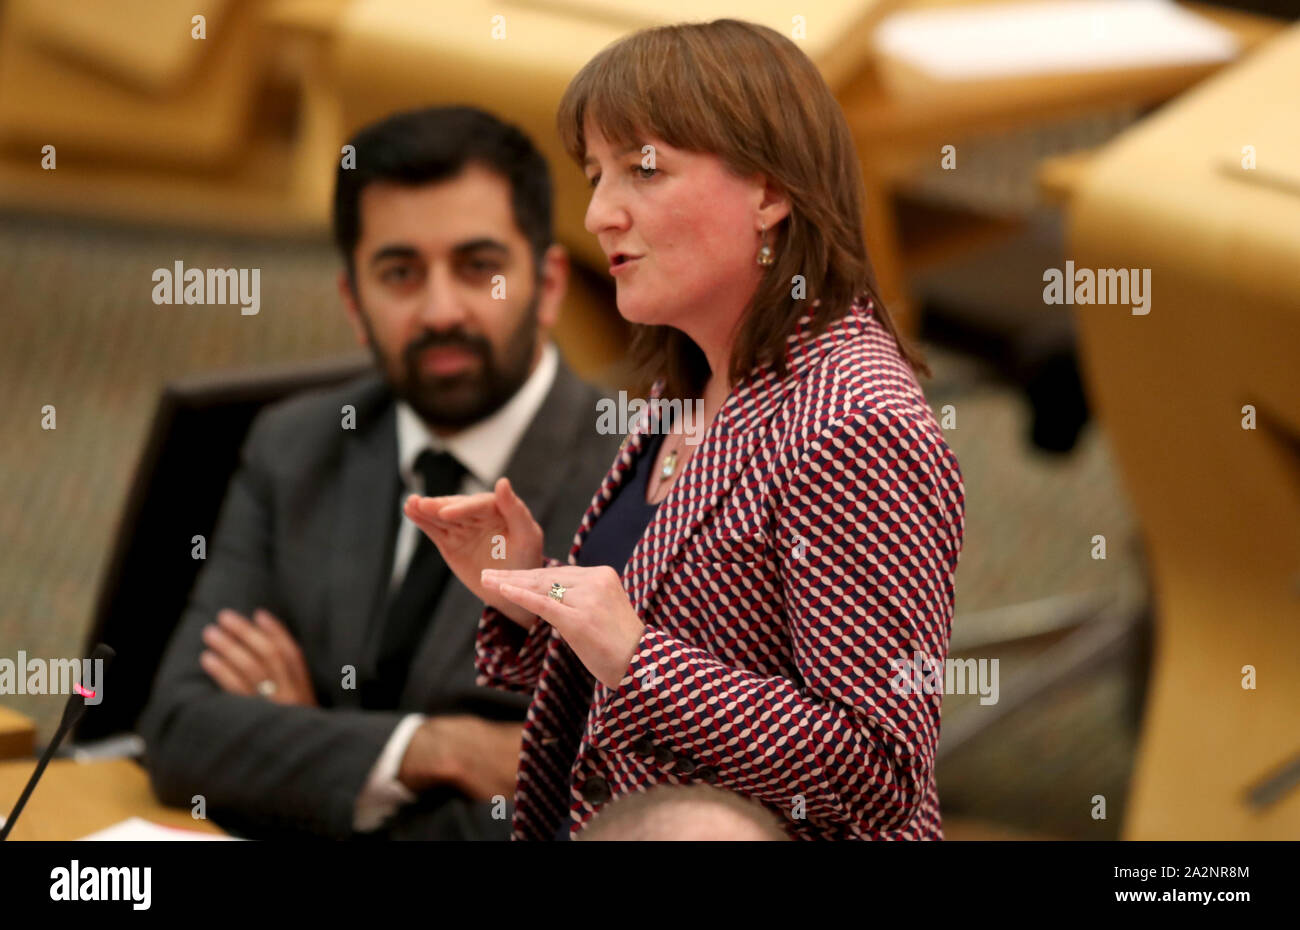 Minister for Children and Young People Maree Todd in the main chamber of the Scottish Parliament, Edinburgh, during the parliamentary debate on the Children (Equal Protection from Assault) (Scotland) Bill. If passed the legislation means a ban on smacking of children. Stock Photo